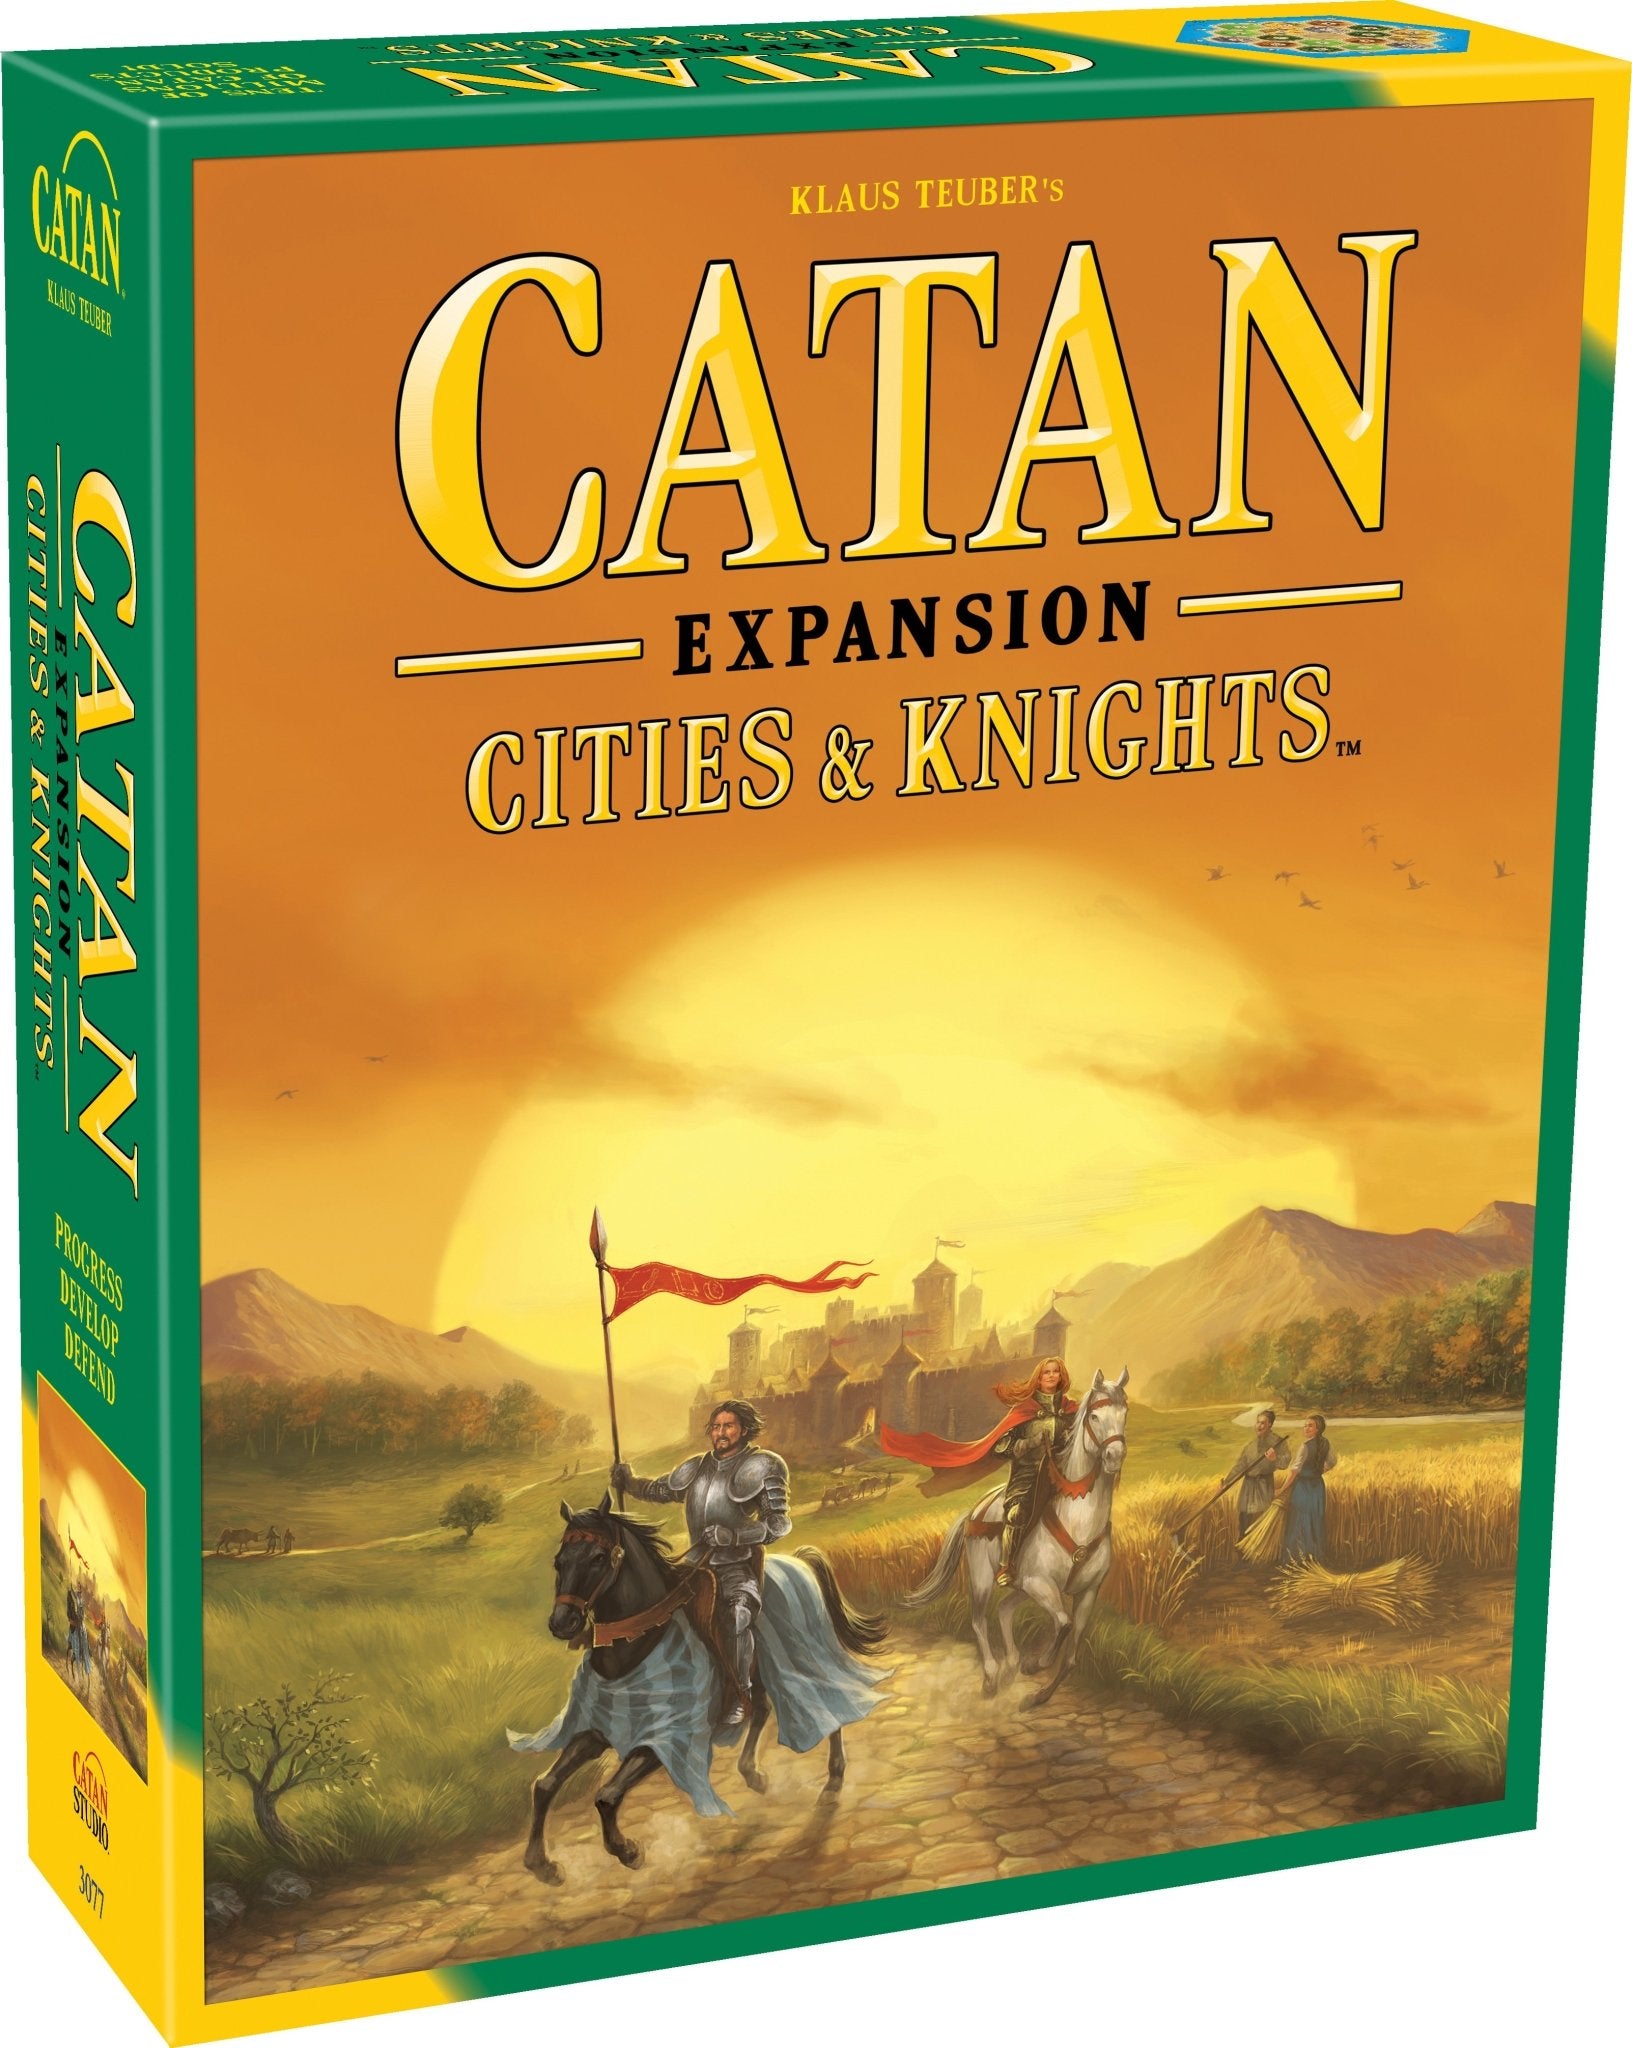 Catan: Cities & Knights Game Expansion - Gamescape